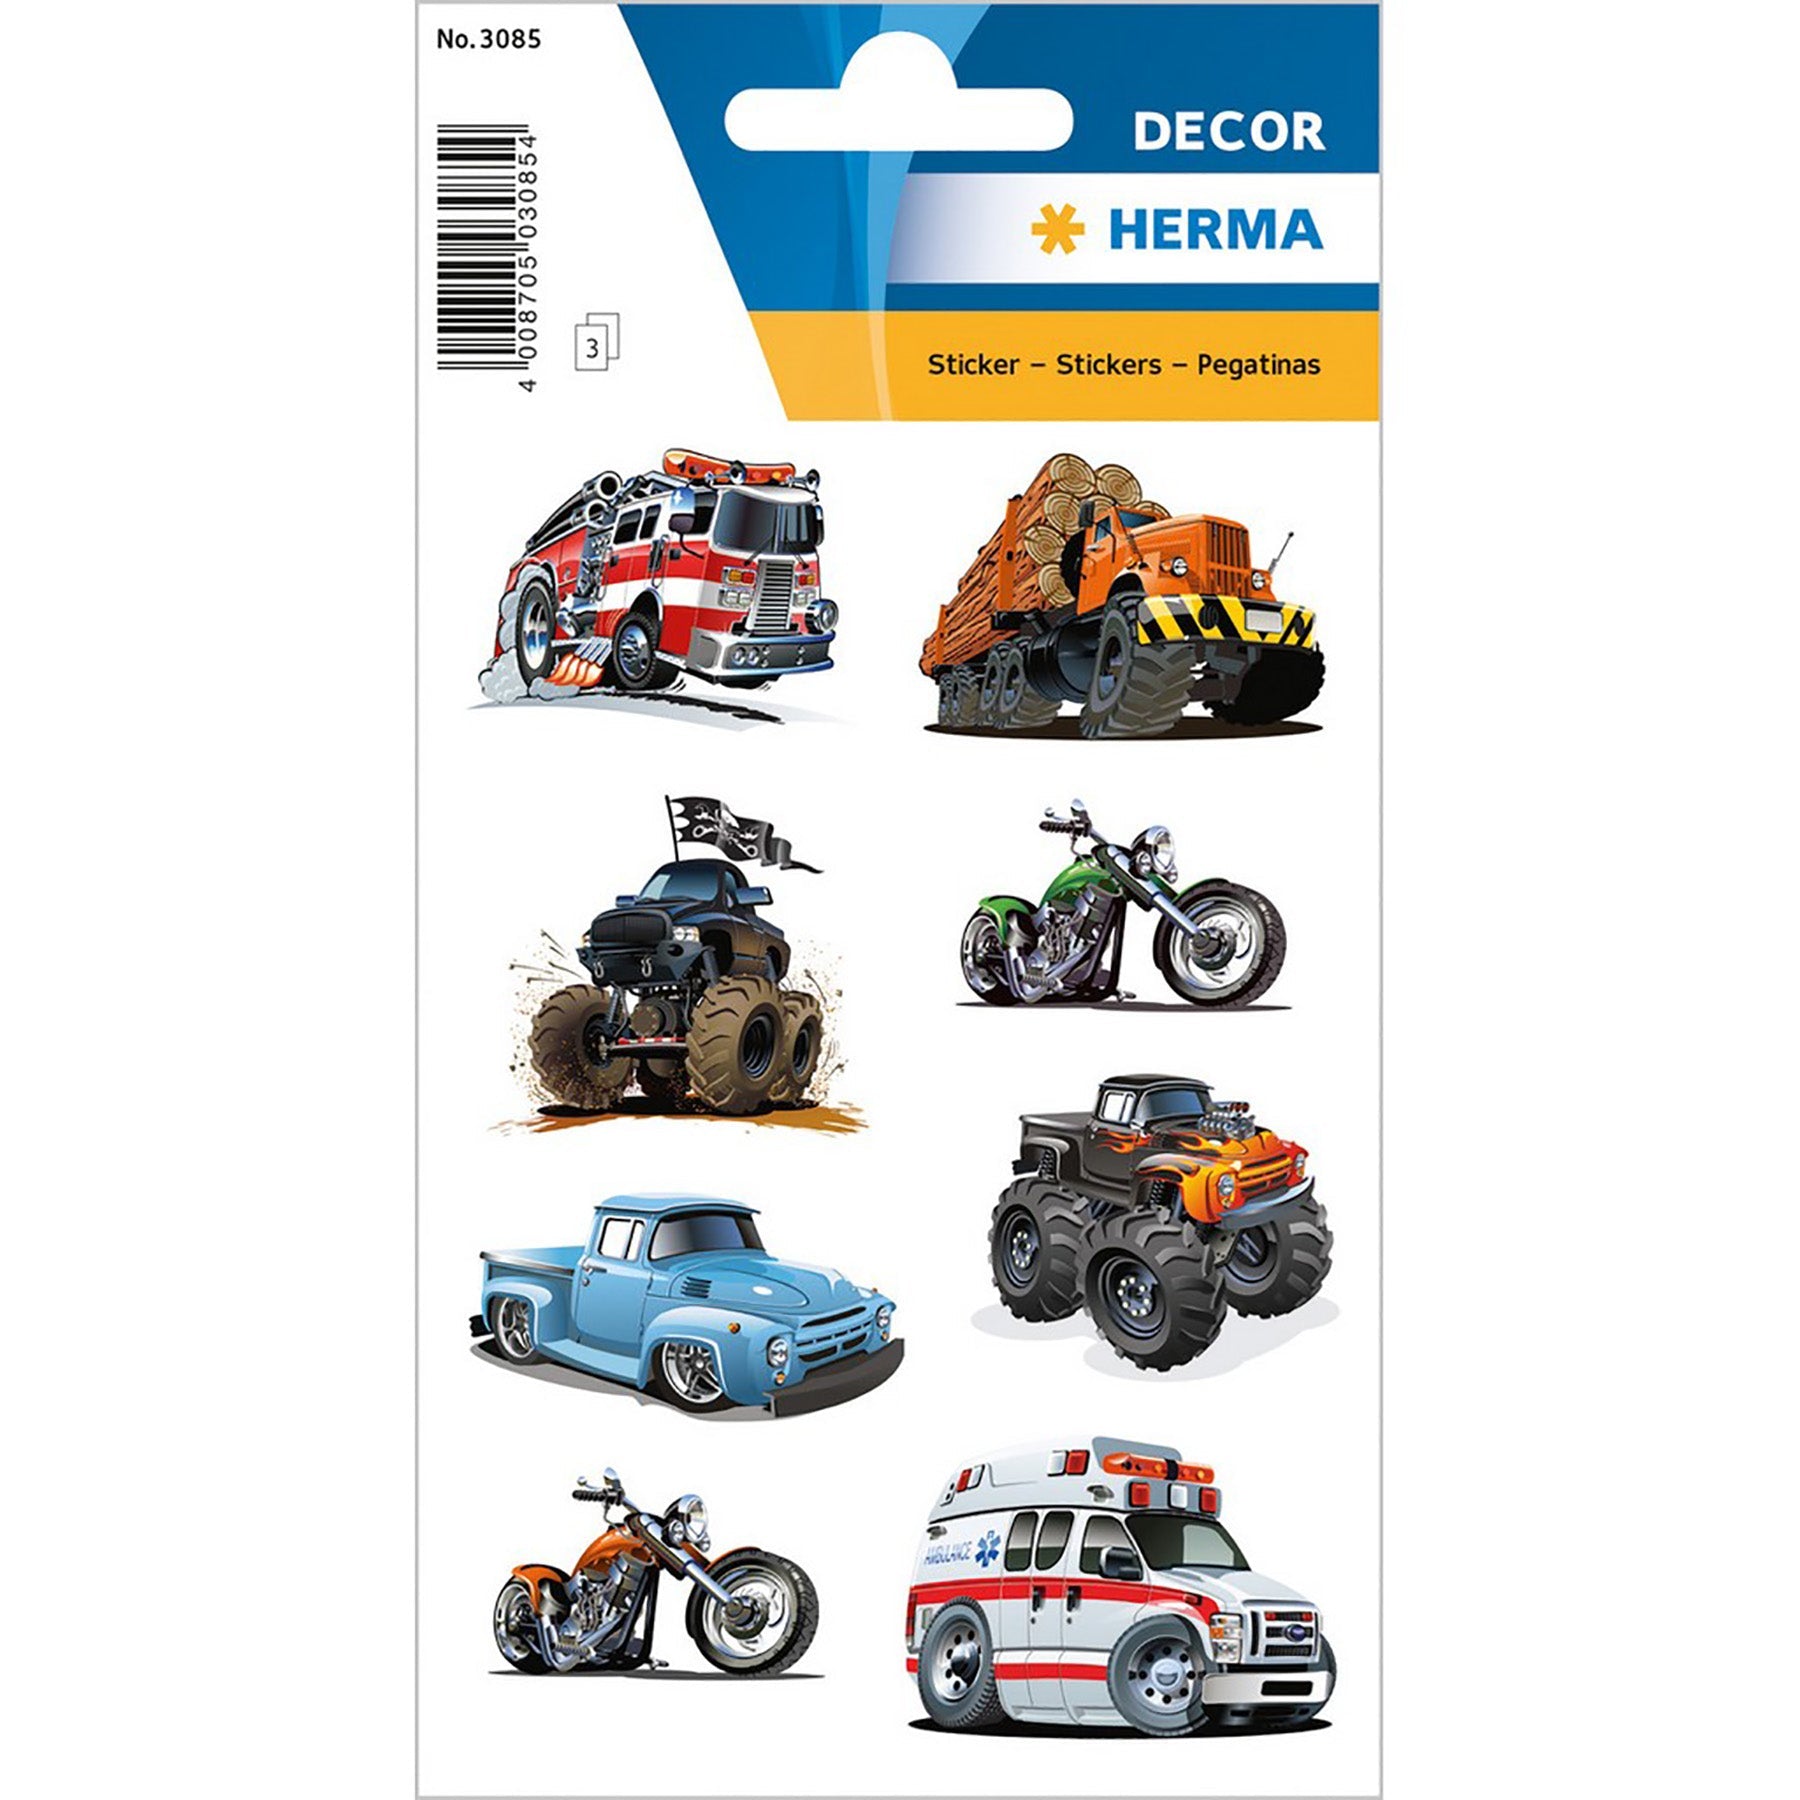 Herma Decor 3 Sheets Stickers American Cars 4.75x3.1in Sheet